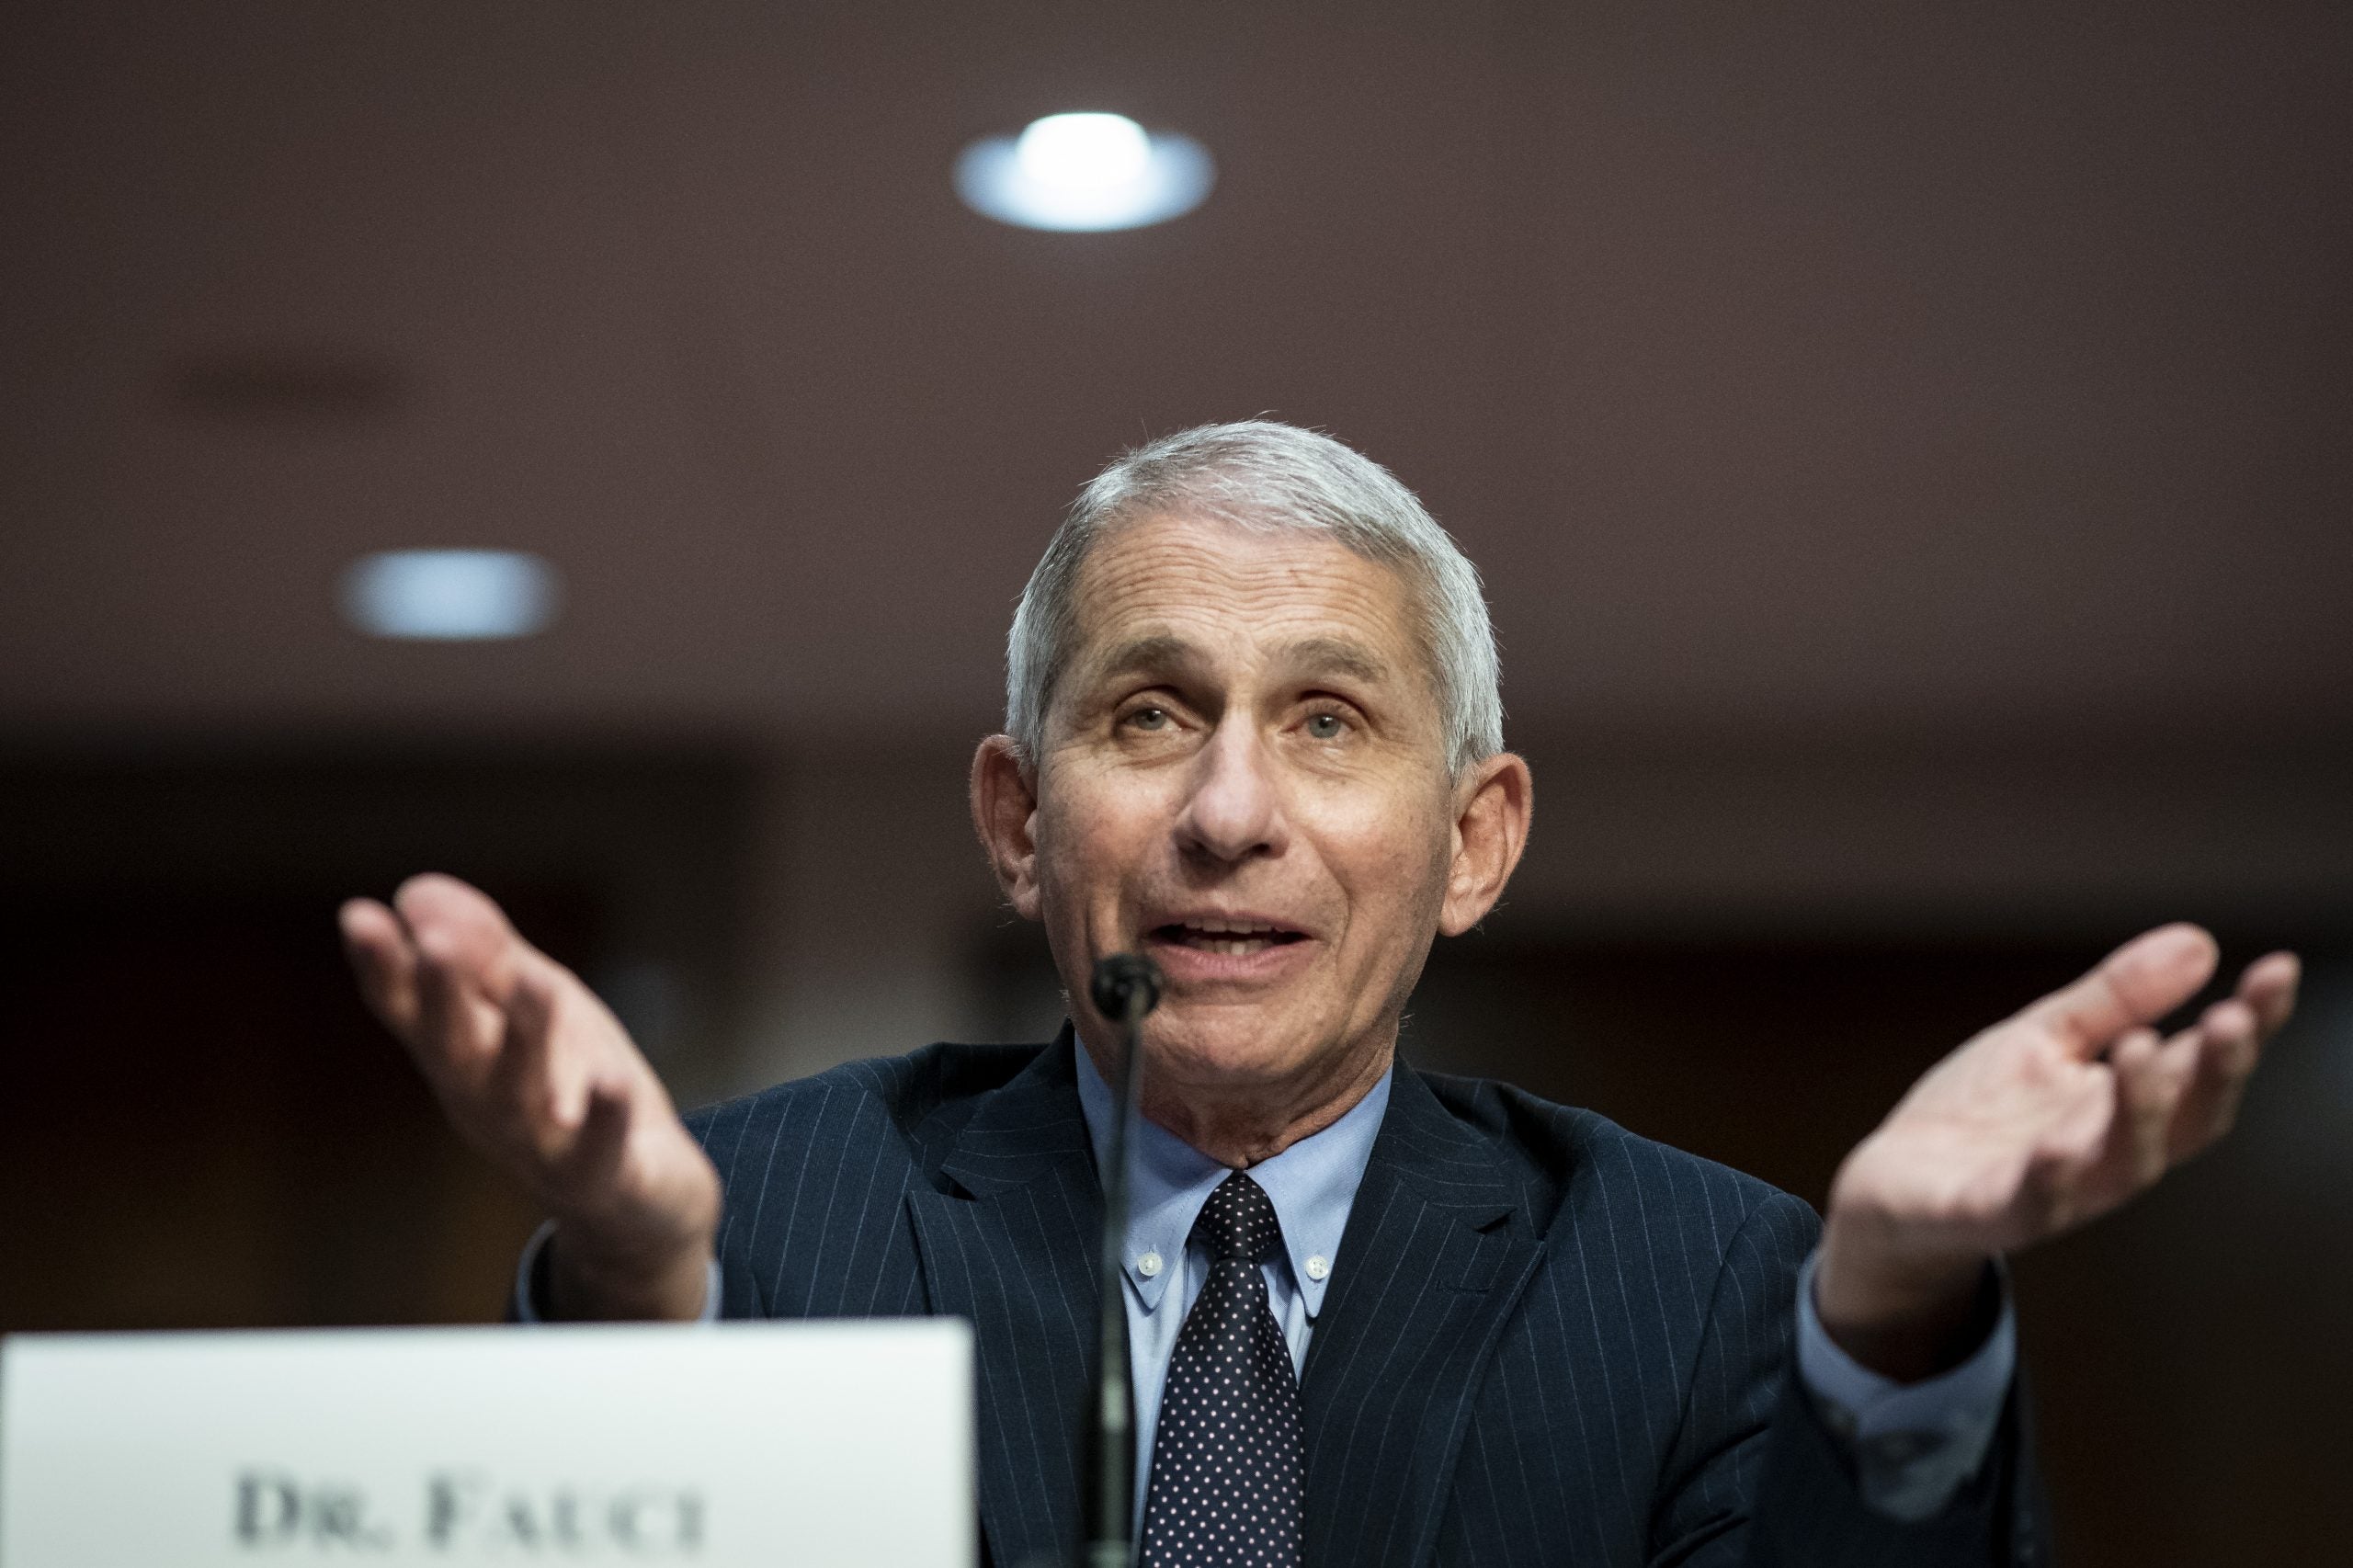 Fauci Responds To Trump’s Problematic Tweets About The Coronavirus